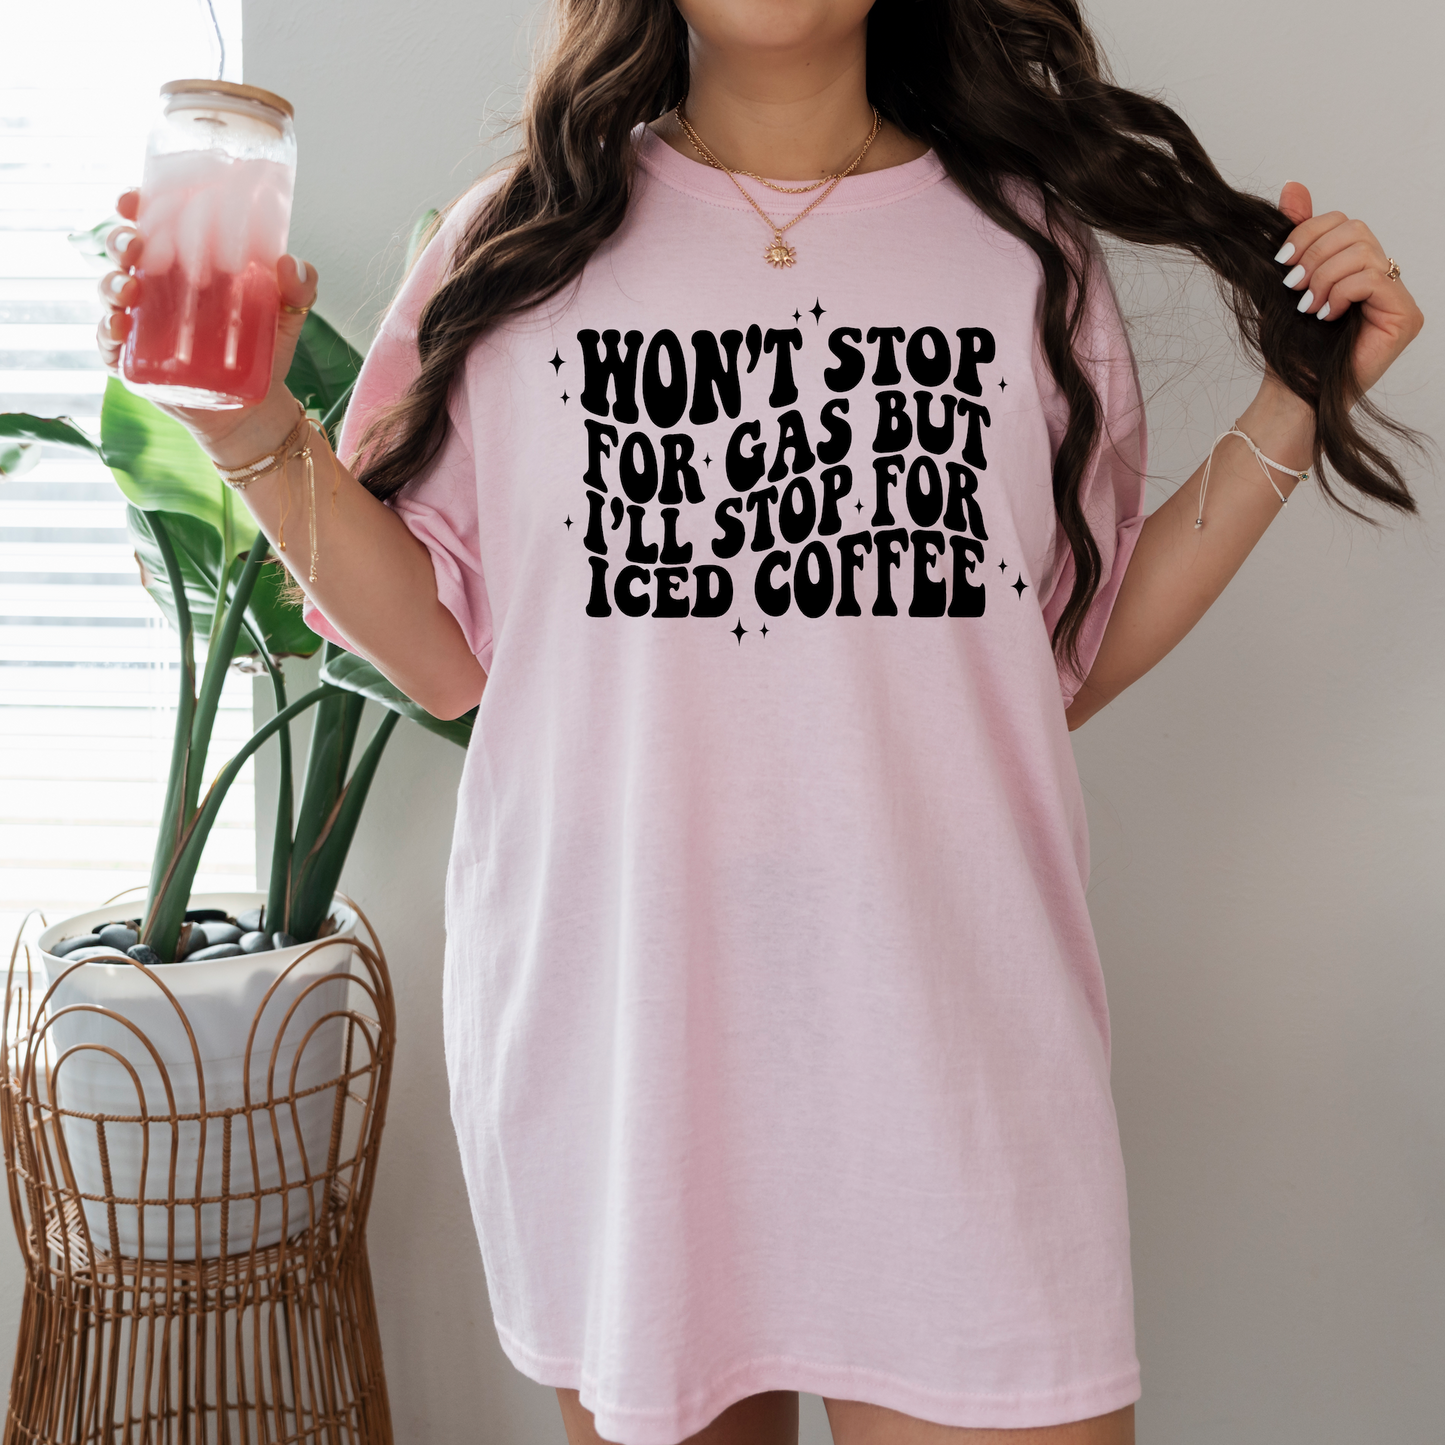 Wont Stop For Gas But I'll Stop for Iced Coffee Comfort Colors T-Shirt